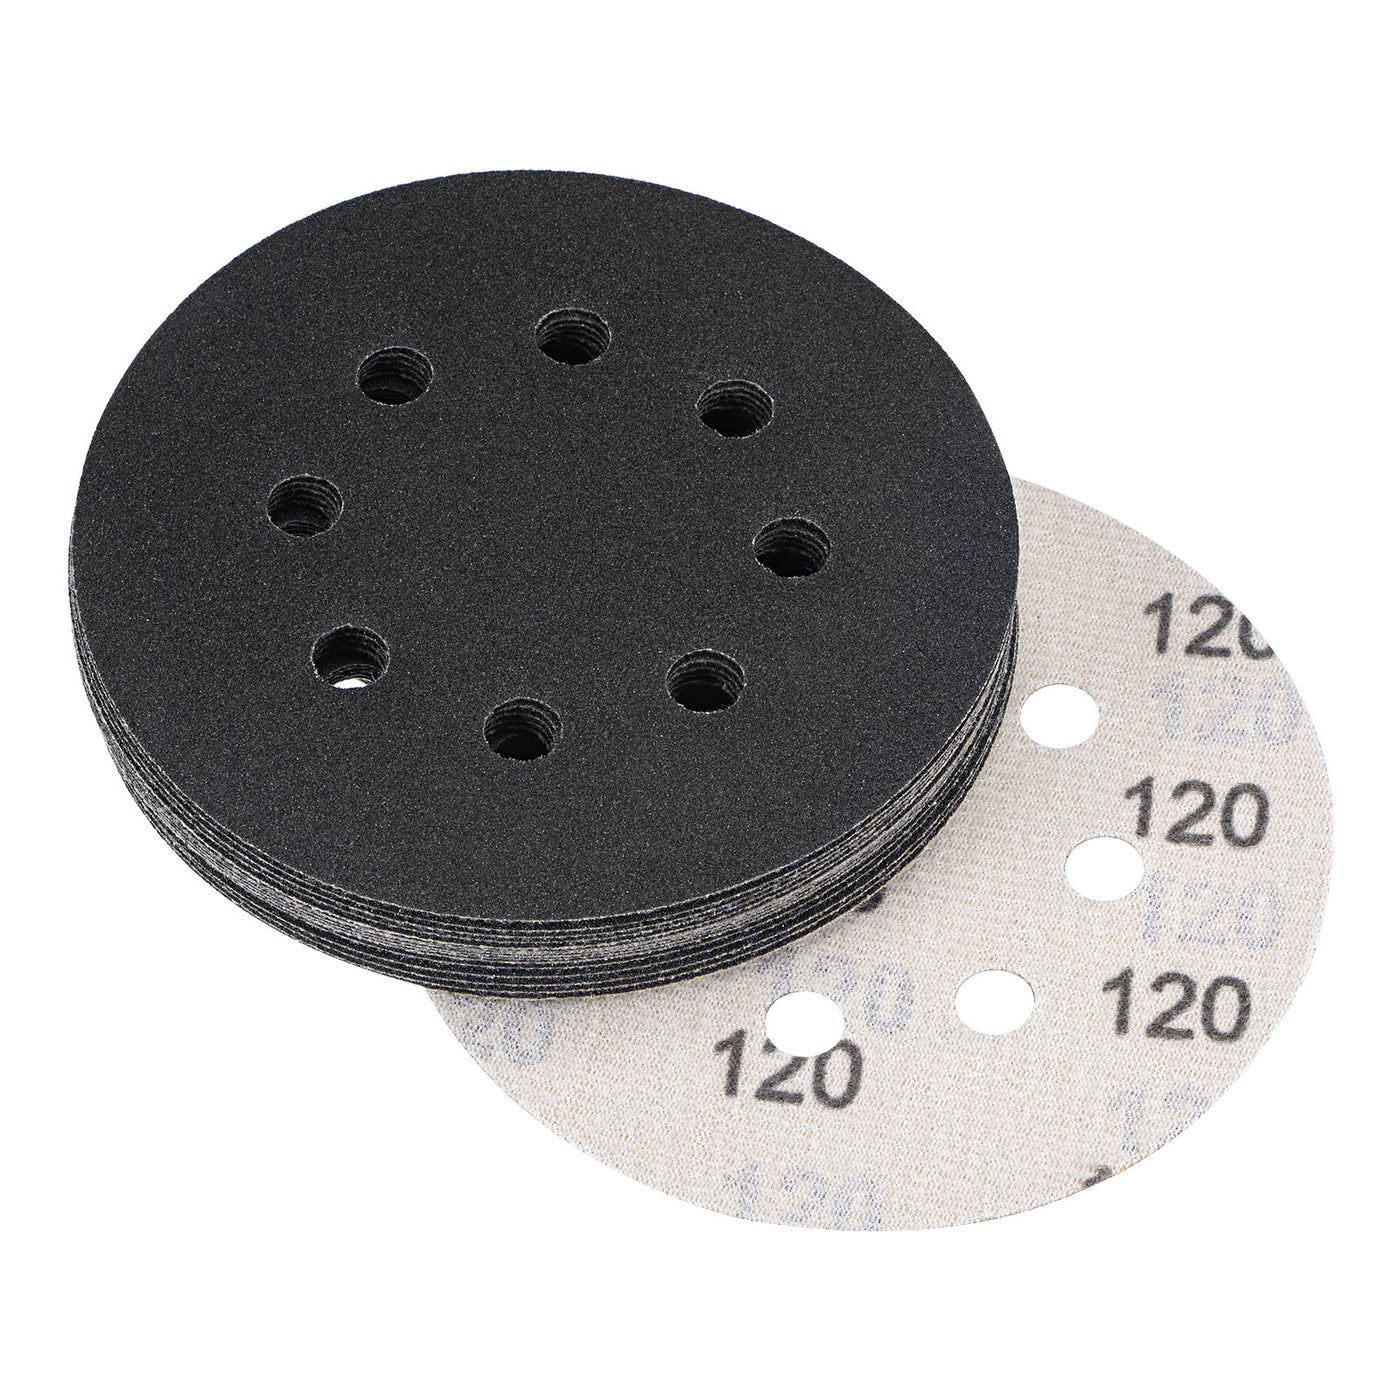 Uxcell Uxcell 5 Inch 60 Grit 8 Hole Sanding Discs Wet/Dry Silicon Carbide Sandpaper 15 Pcs